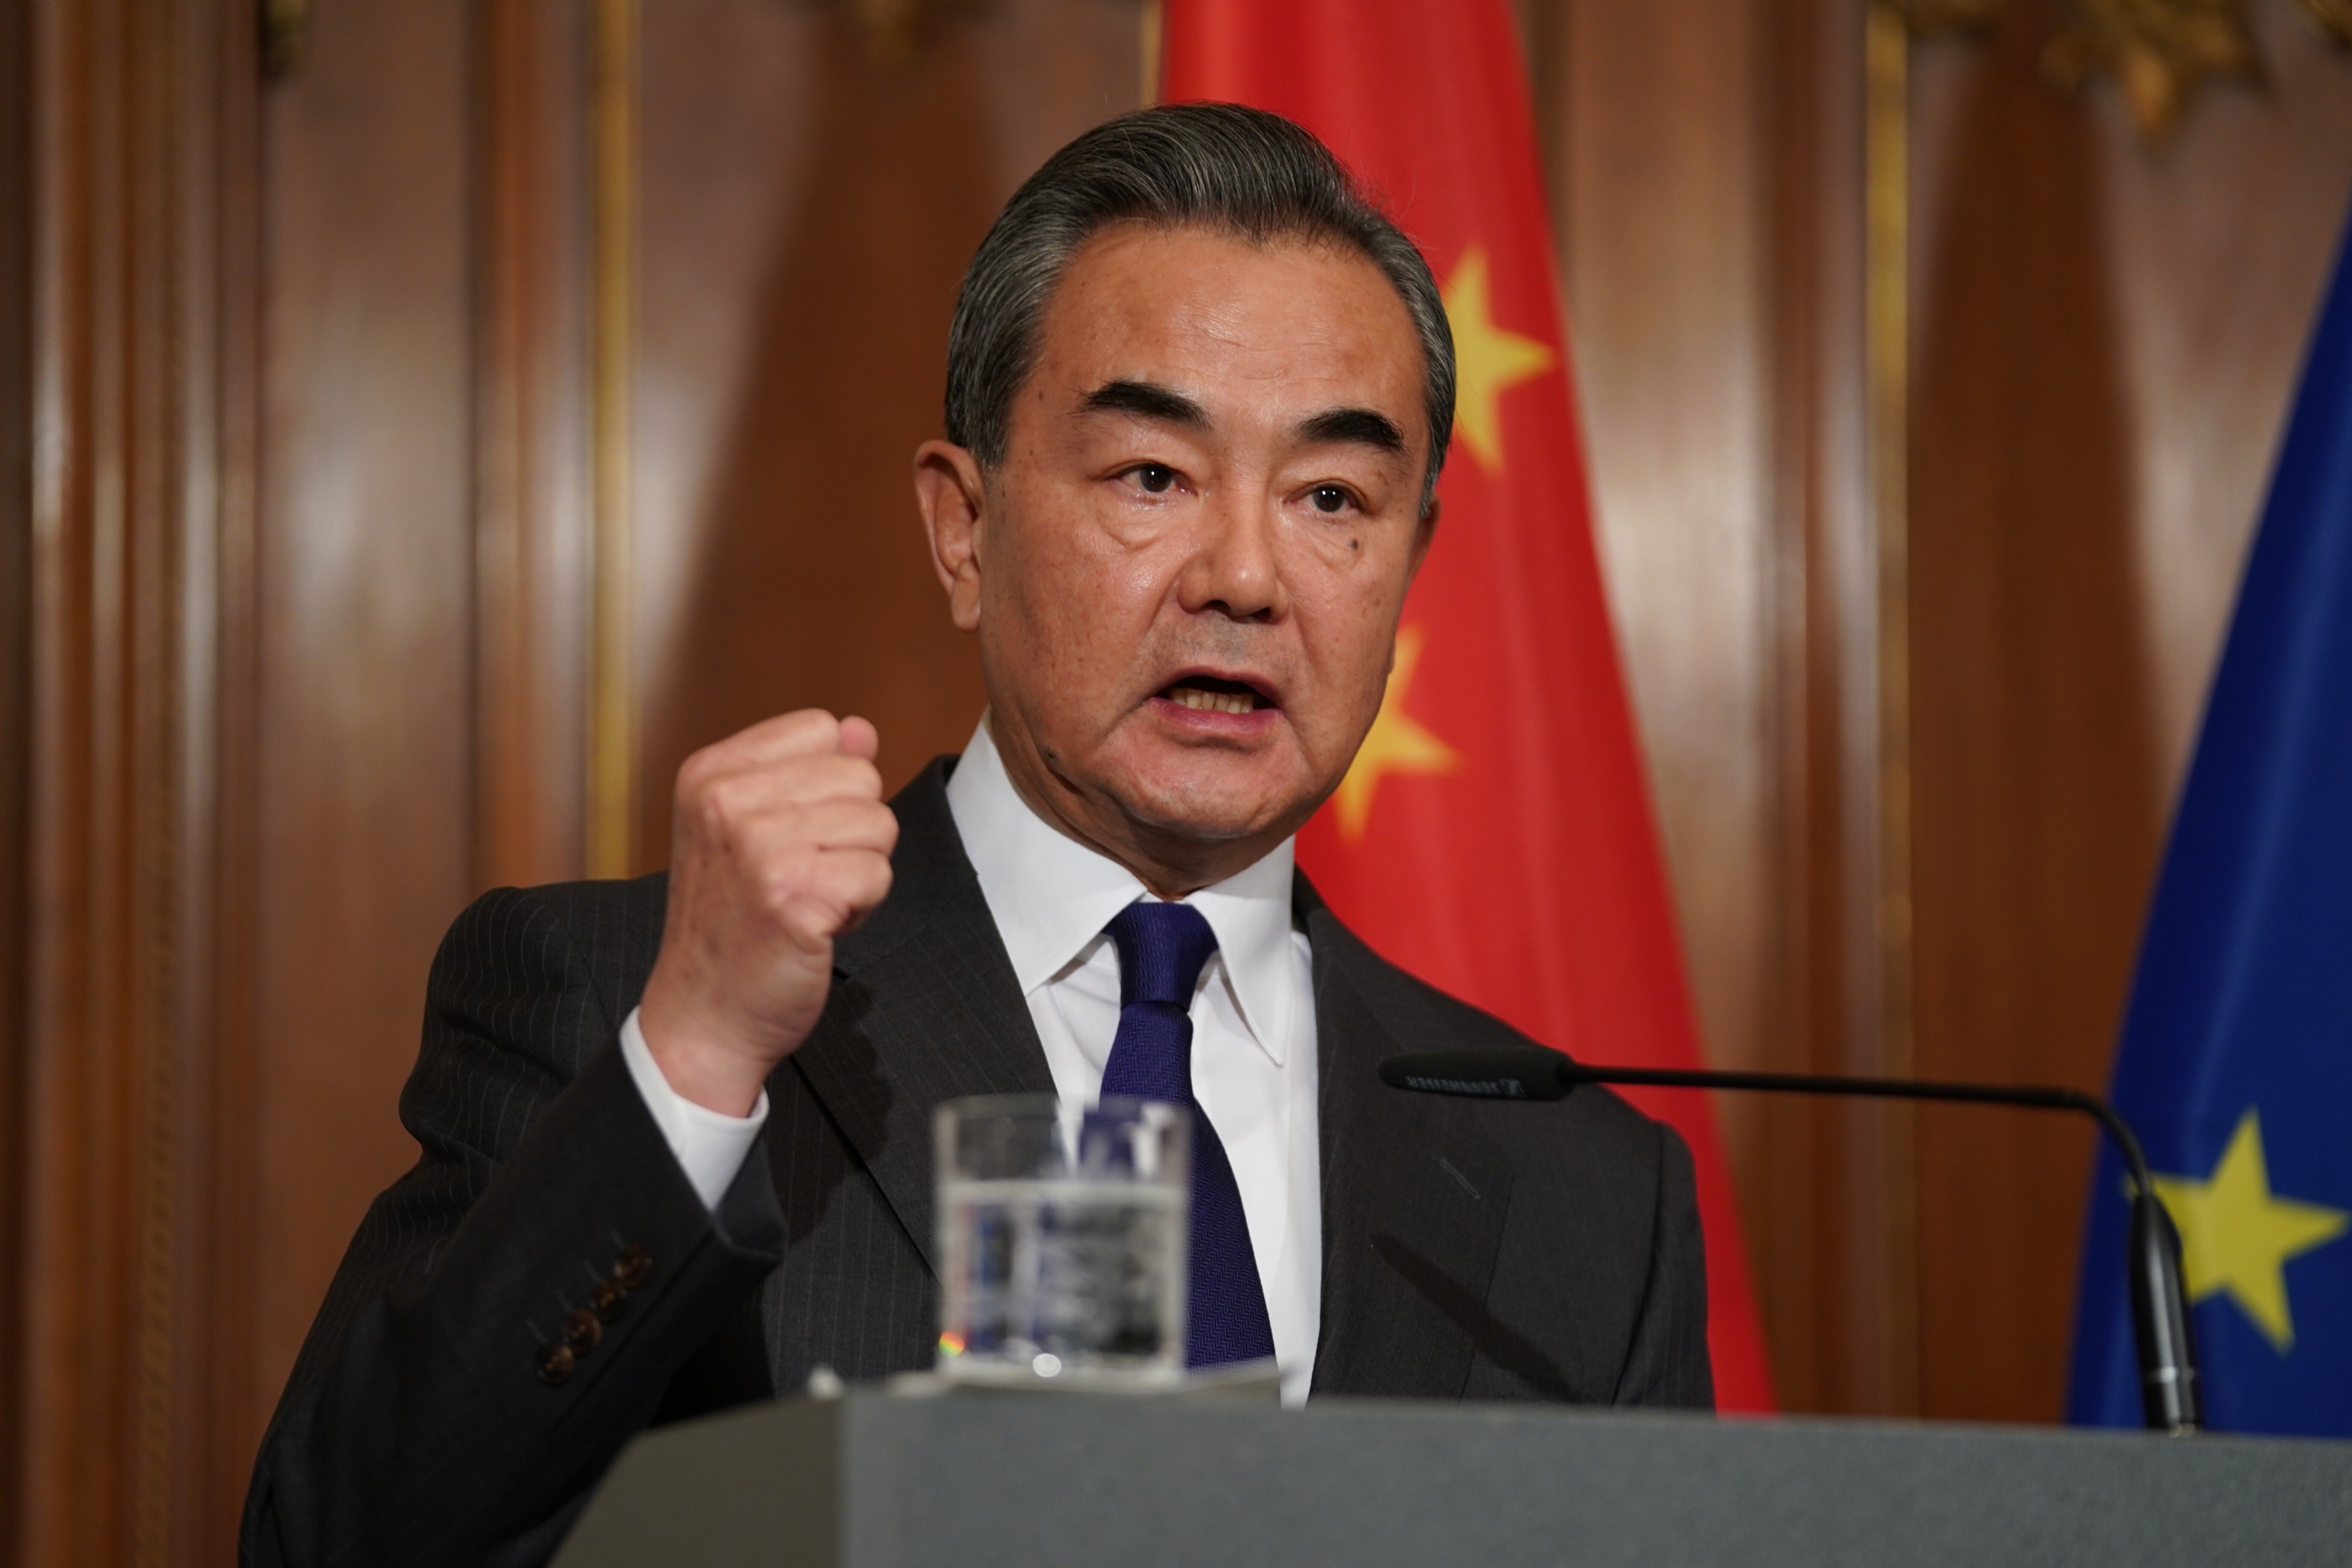 Chinese Foreign Minister Wang Yi attends a press conference at the Villa Borsig in Berlin on February 13. Photo: EPA-EFE